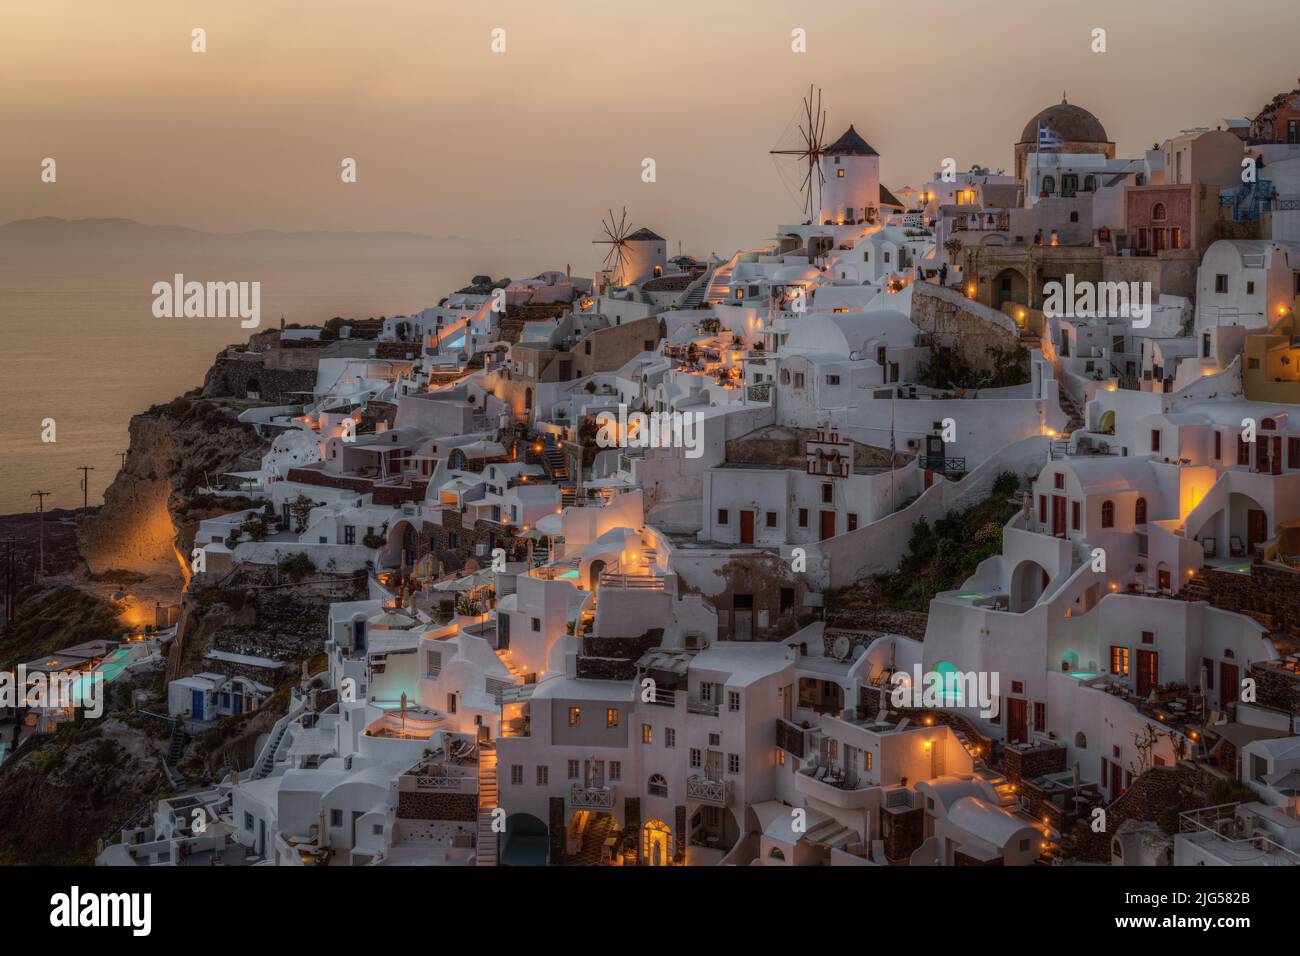 Amazing sunset at Oia, the most typical village of Santorini, Greece Stock Photo